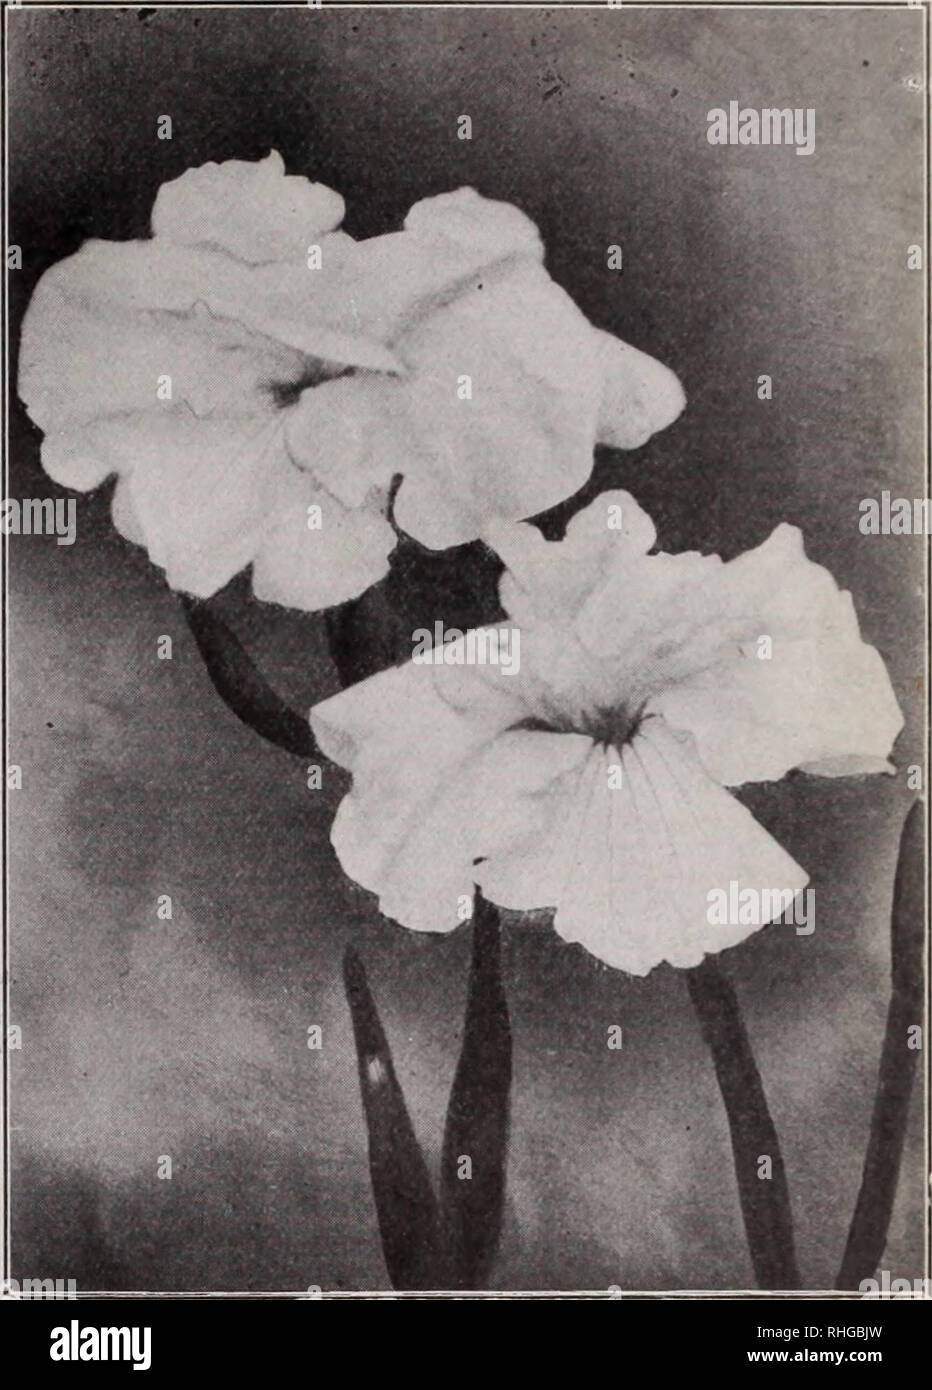 . Boddington's quality bulbs, seeds and plants / Arthur T. Boddington.. Nursery Catalogue. BODDINGTON'S ^yUa£lPl/ BULBS JAPANESE IRIS {Iris Kaempferi) The Japanese Iris is the most showy and strikingly beautihil of all the large family of Iris; and very few flowers, the orchid not being excepted, surpass this unique flower in size and gorgeousness and variety of color, which ranges from snow-white to the deepest purple, striped, variegated and nmlticolored in the greatest profusion of coloring. The collections which we offer below are American grown, thor- oughly acclimated and hardy and true Stock Photo